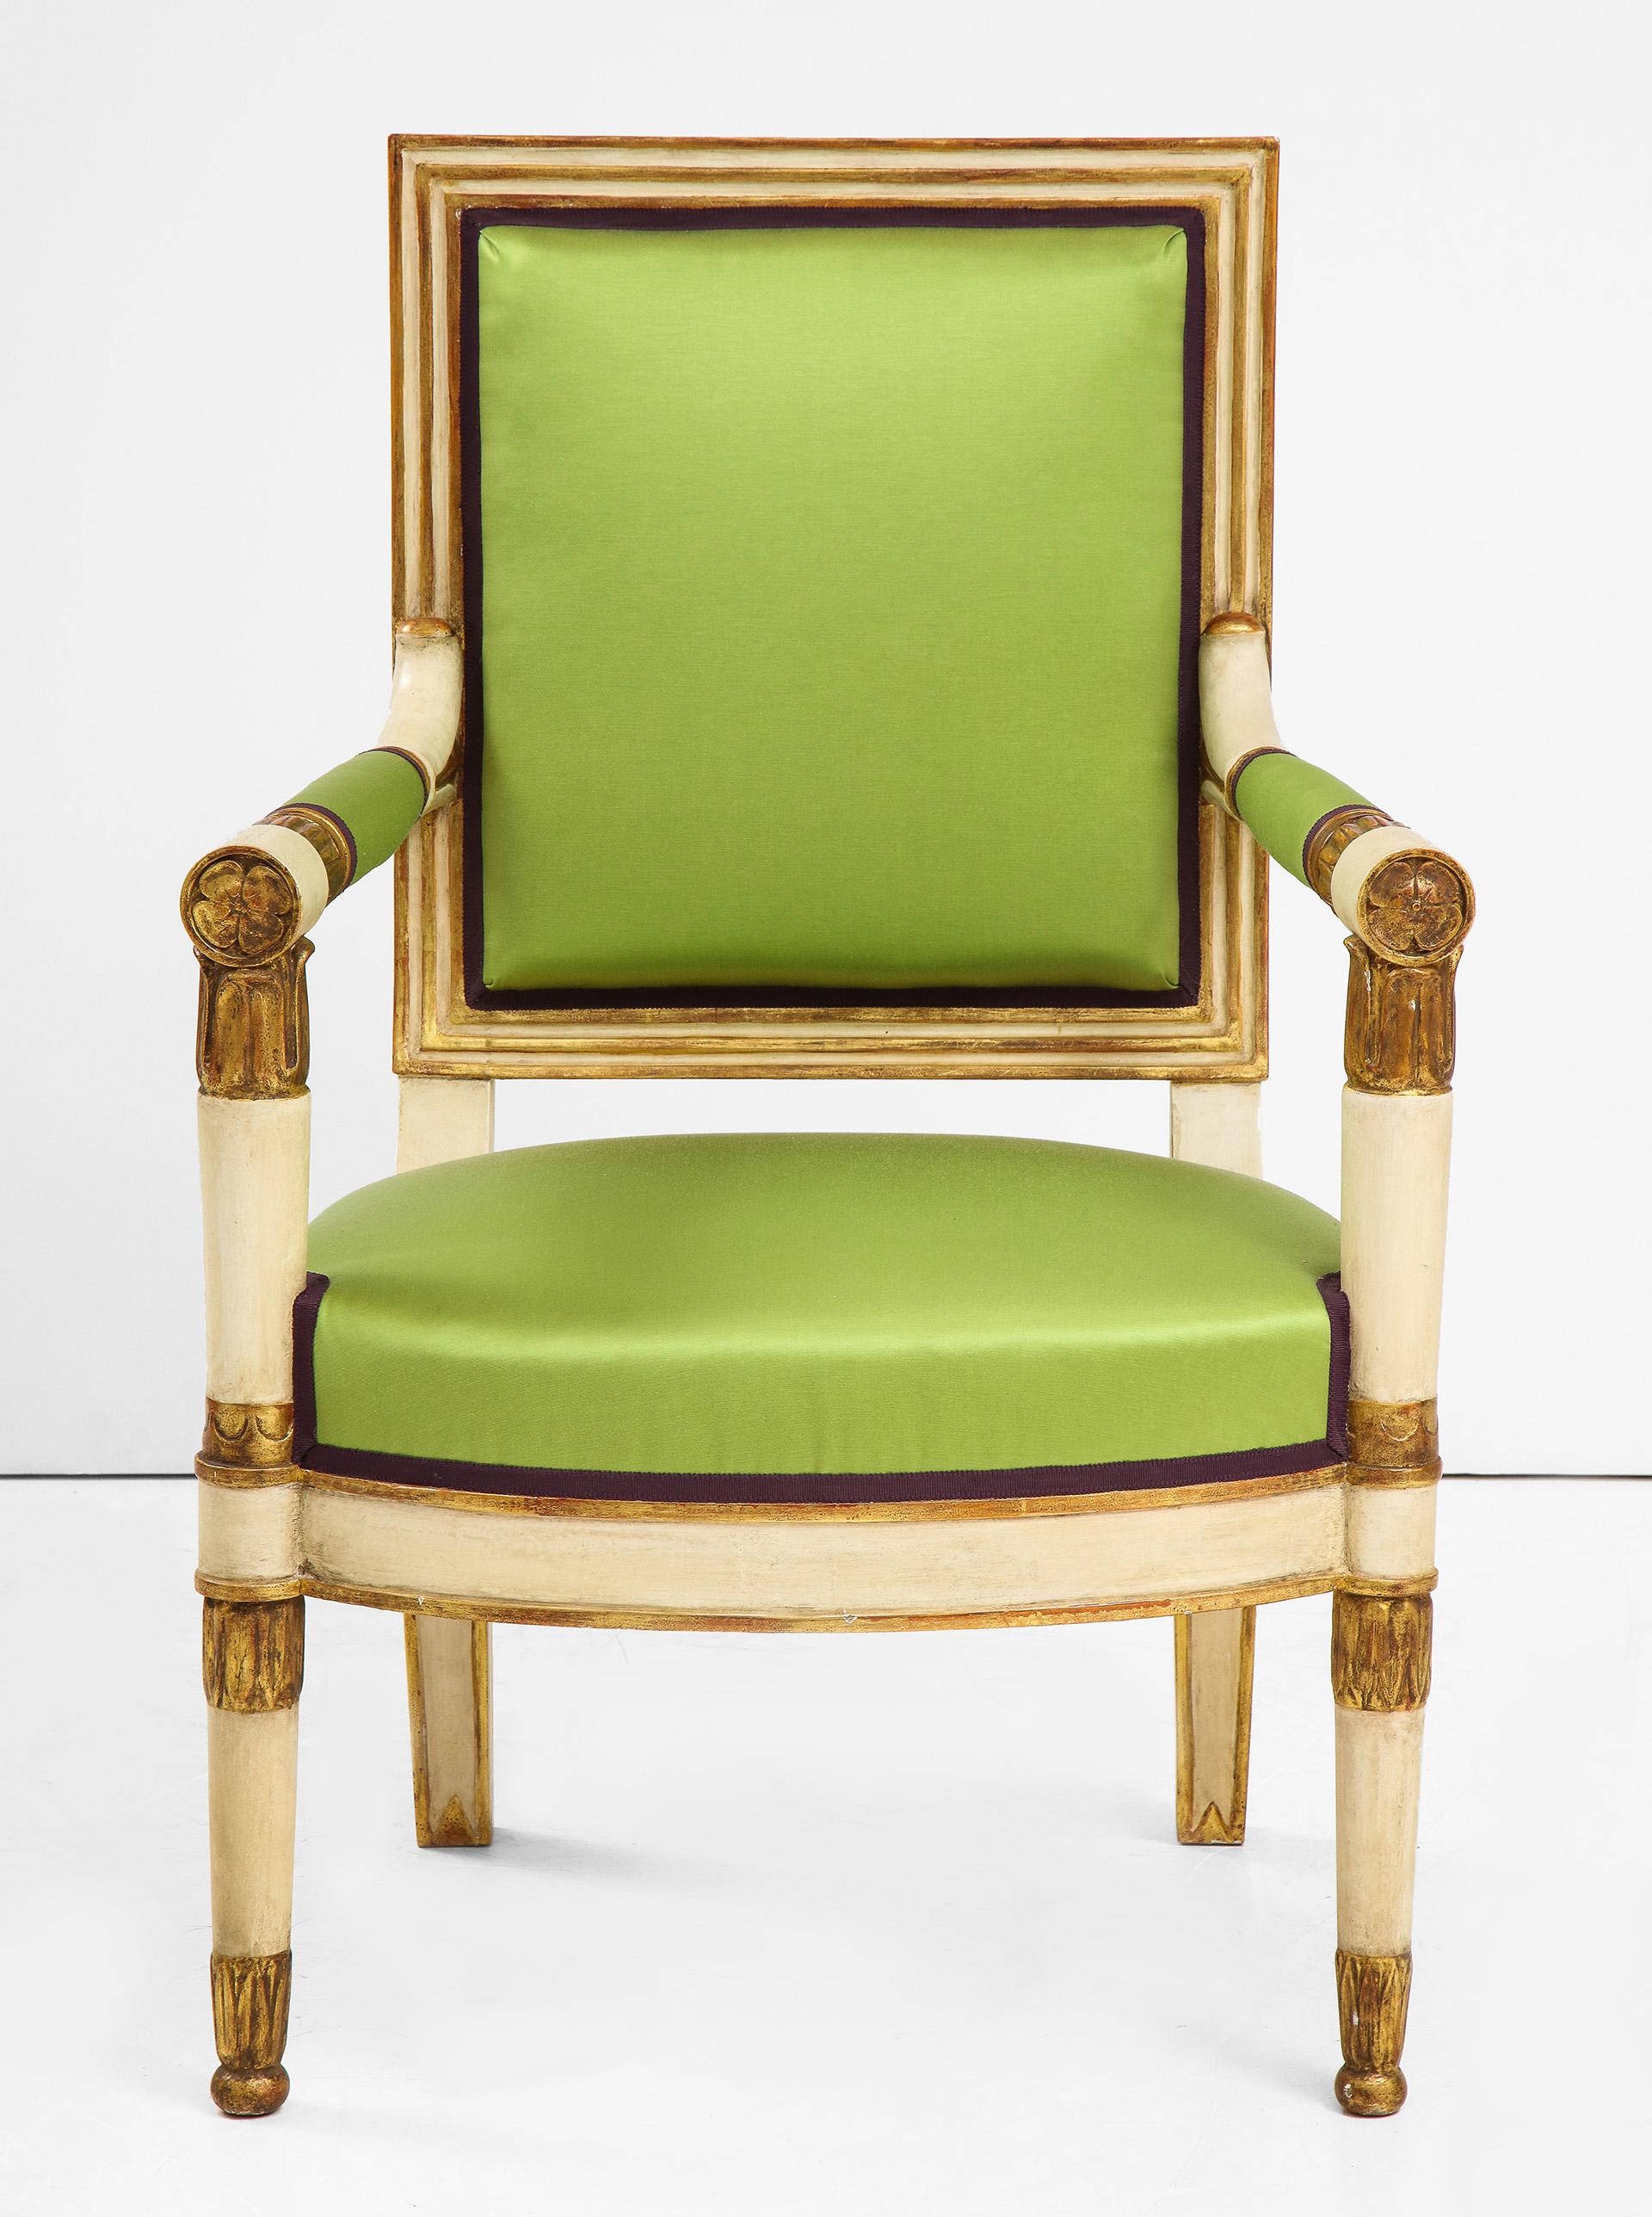 The painted and parcel gilt upholstered back flanked by upholstered round arms ending in gilt florets.  The bowed attached seat raised on white and parcel gilt legs ending in ball feet. 
4 Ams from 1810 
4 additional Arms from a later date.